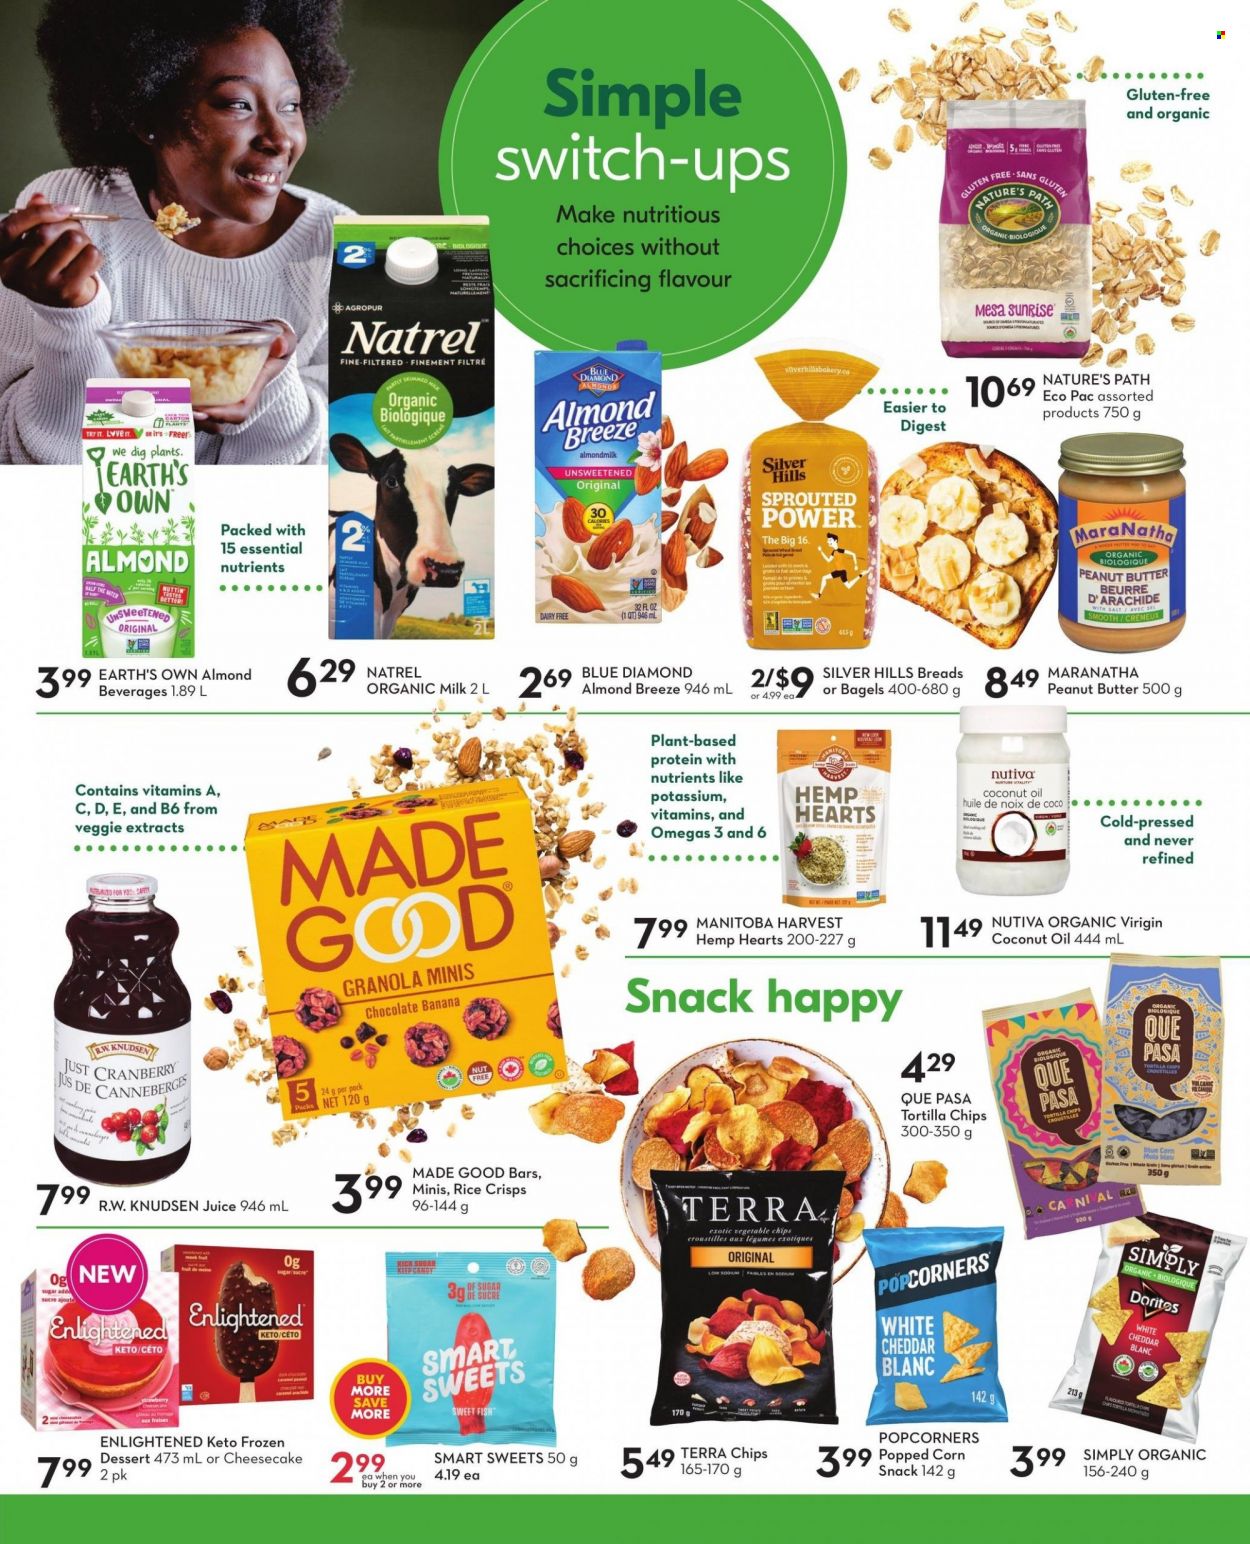 thumbnail - Sobeys Flyer - January 26, 2023 - February 01, 2023 - Sales products - bagels, cheesecake, fish, cheese, organic milk, Almond Breeze, Enlightened lce Cream, chocolate, snack, Doritos, tortilla chips, popcorn, vegetable chips, rice crisps, sugar, coconut oil, peanut butter, Blue Diamond, switch, juice, Hill's, granola. Page 20.